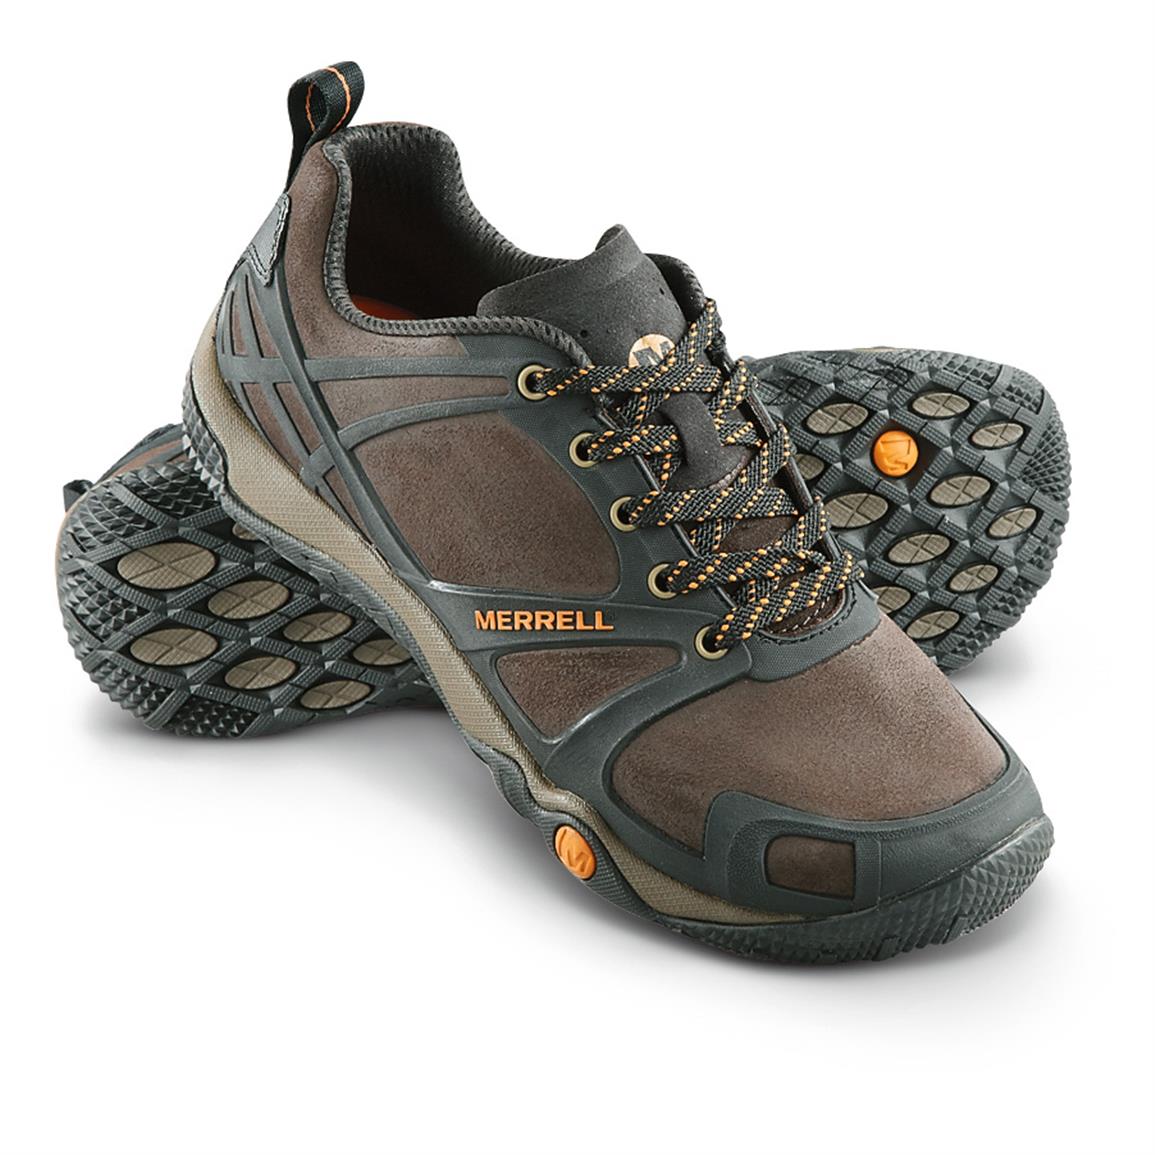 Merrell Proterra Hiking Shoes, Espresso - 617201, Hiking Boots & Shoes ...